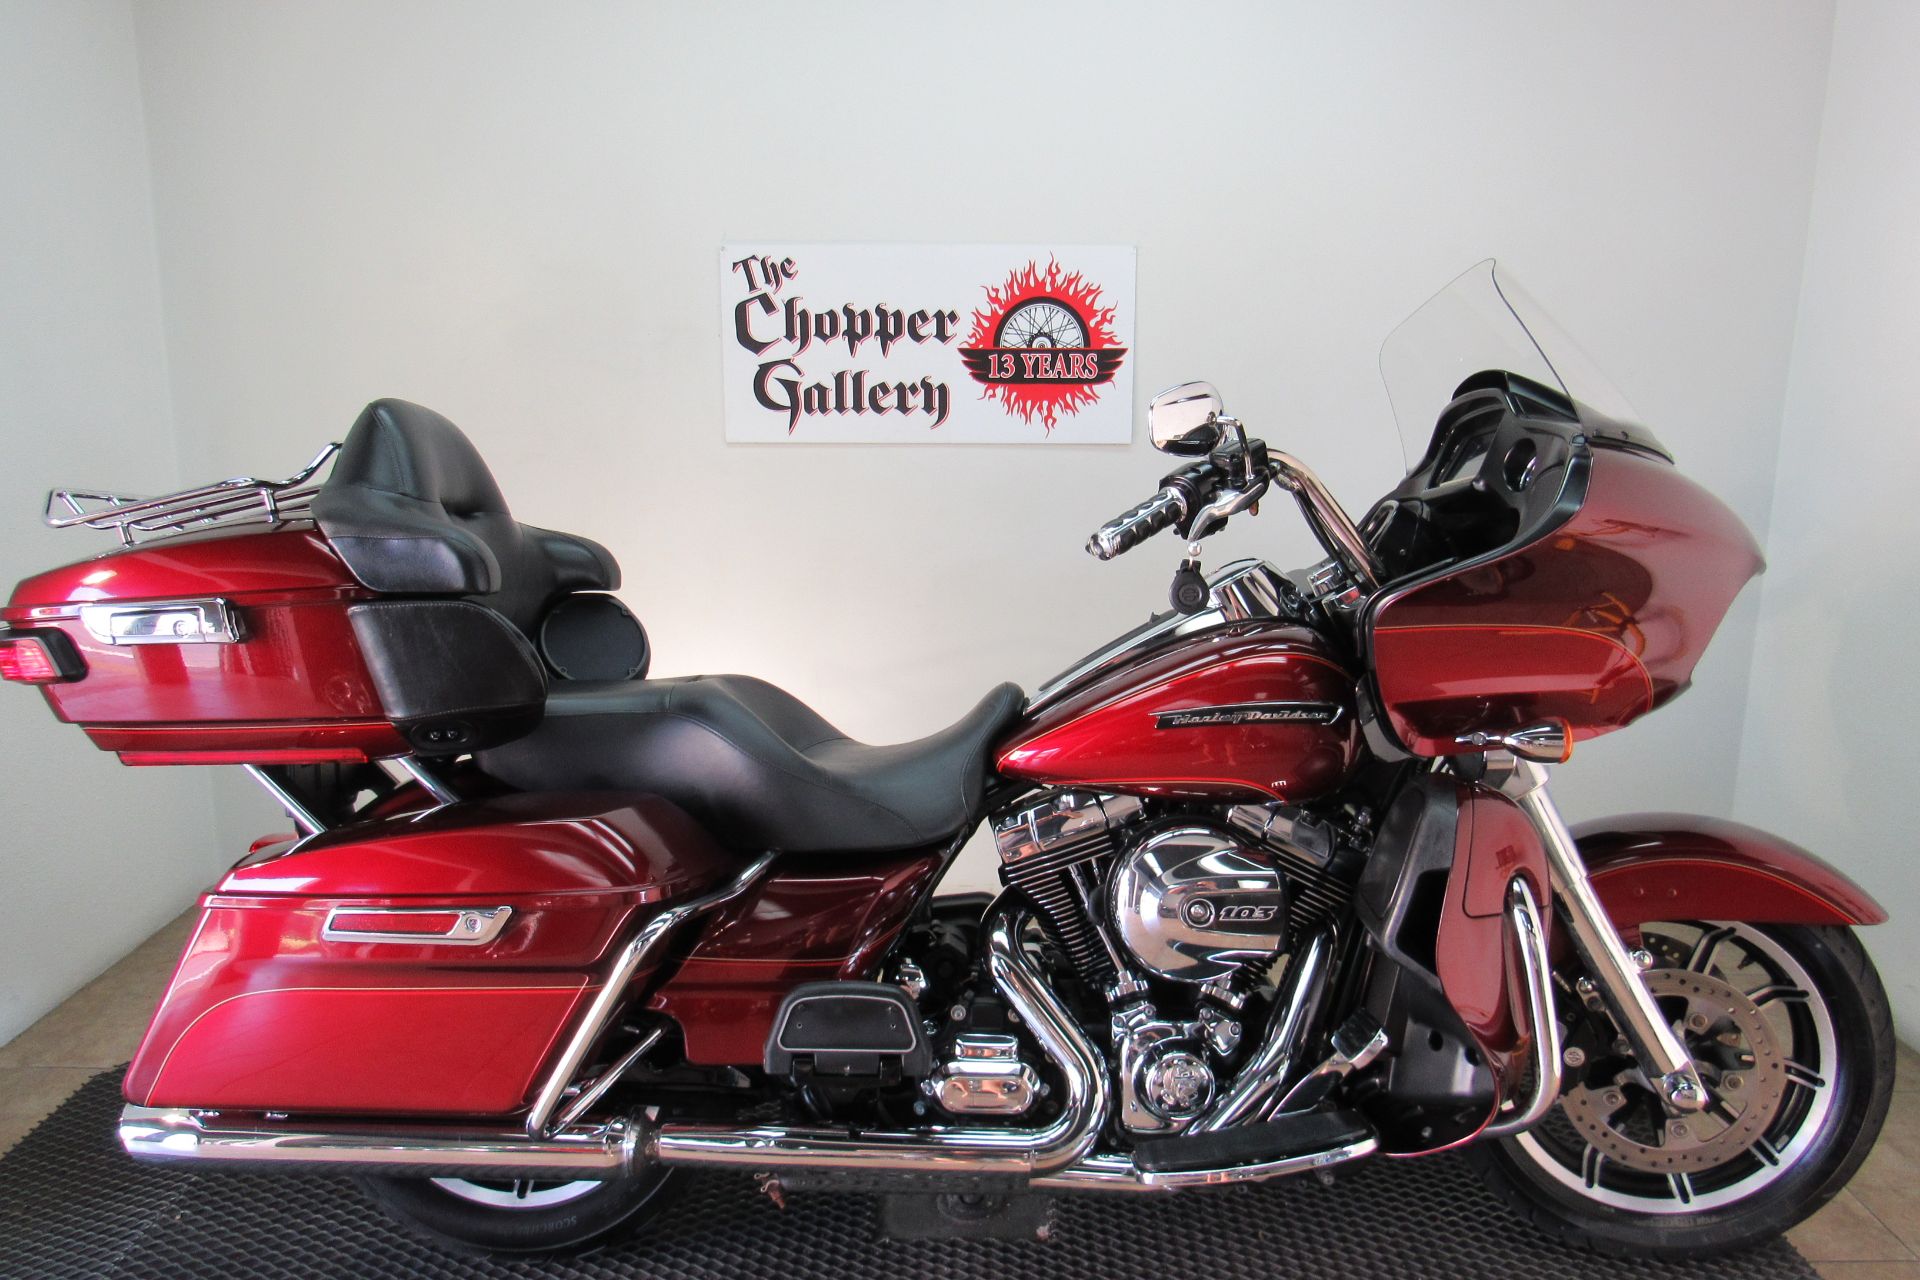 Used 2016 Harley Davidson Road Glide Ultra Motorcycles In Temecula Ca Stock Number V1612315